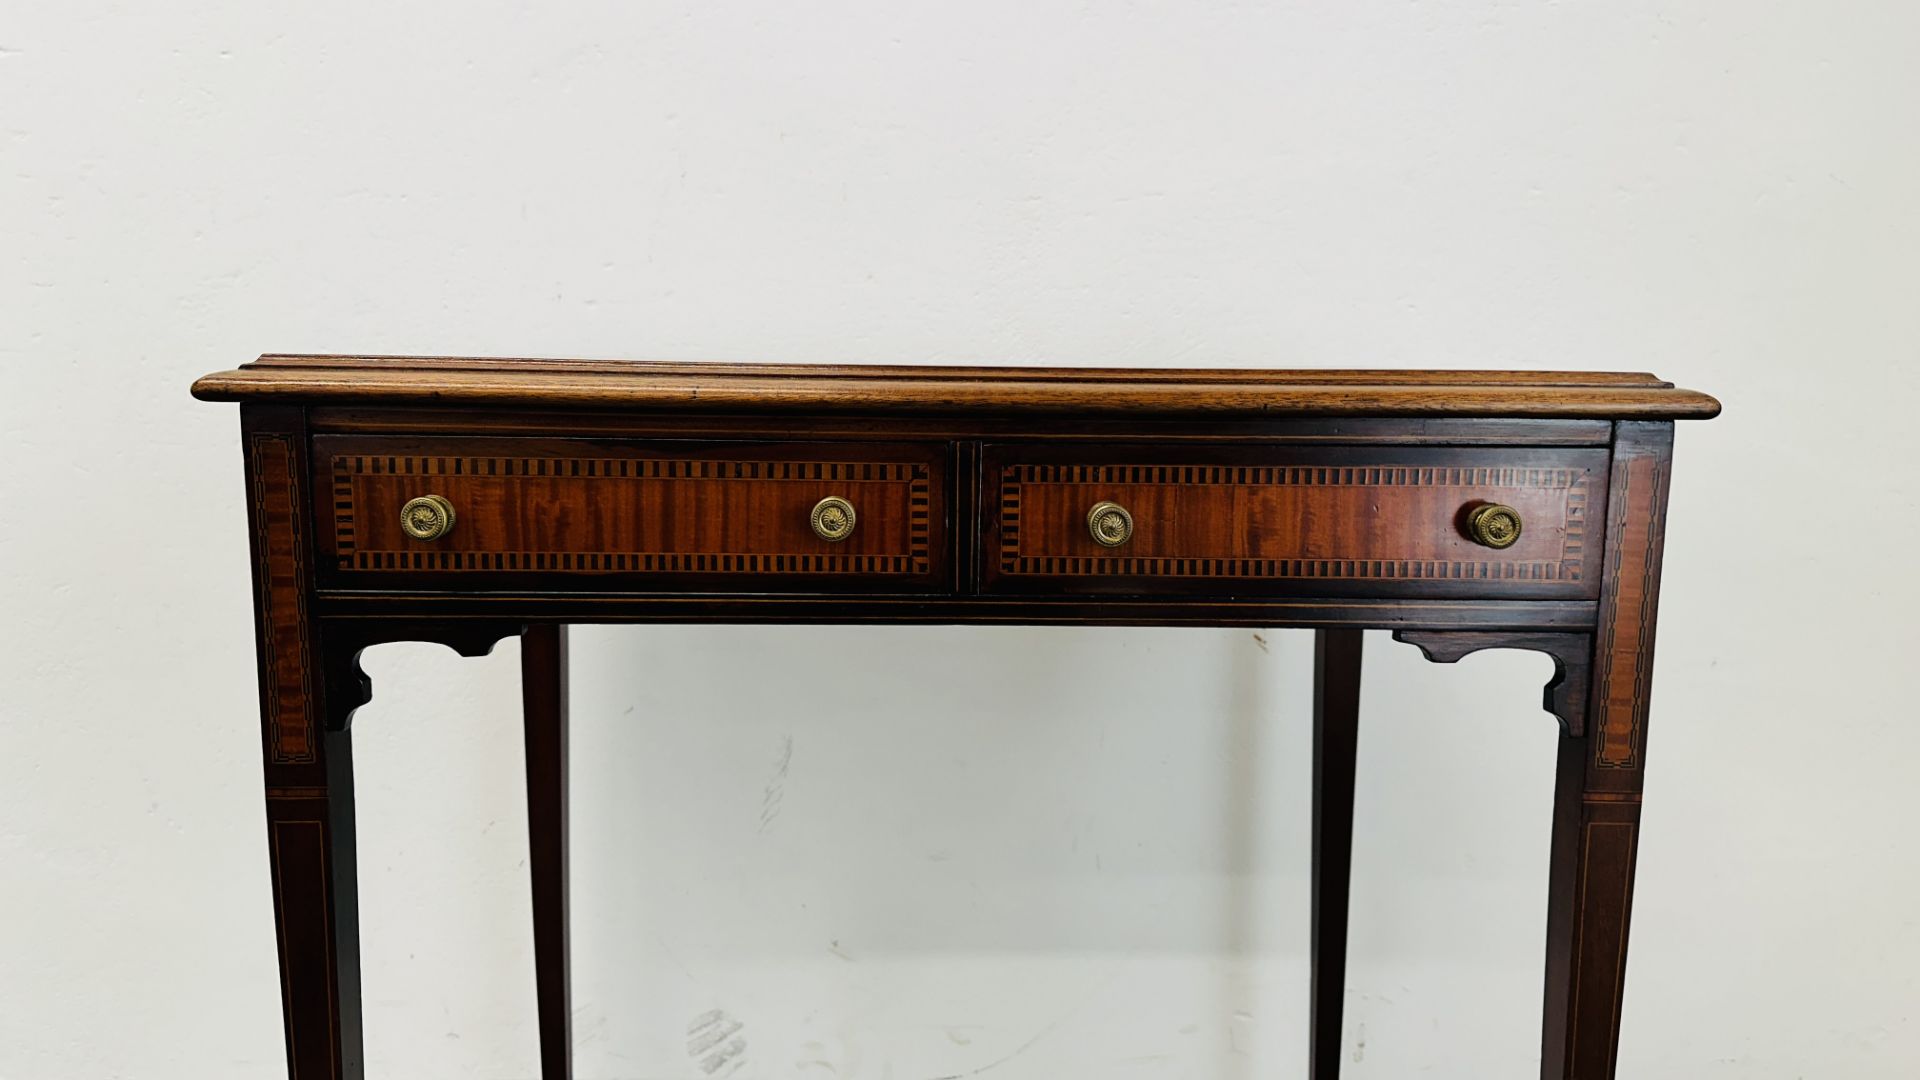 ANTIQUE MAHOGANY & INLAID 2 DRAWER WRITING TABLE WITH BRASS DETAILED HANDLES STANDING ON CASTERS, - Image 4 of 11